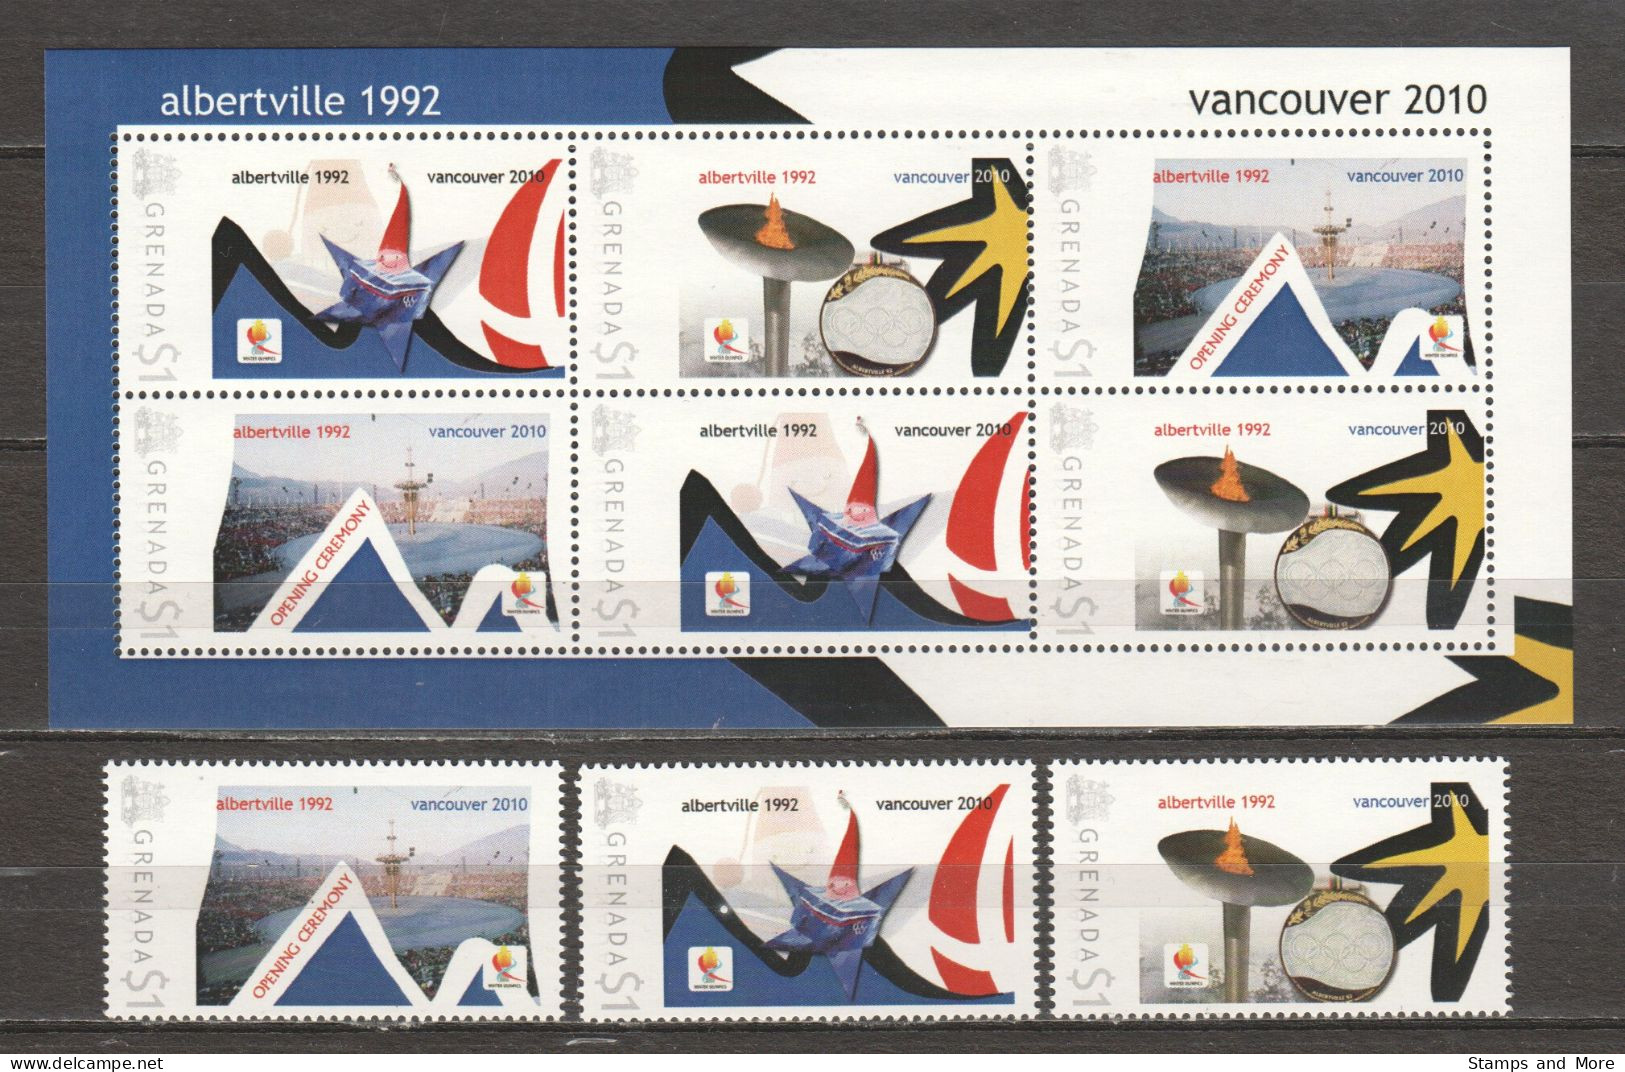 Grenada - Limited Edition Set 16 MNH - WINTER OLYMPICS VANCOUVER 2010 - ALBERTVILLE 1992 - Winter 2010: Vancouver